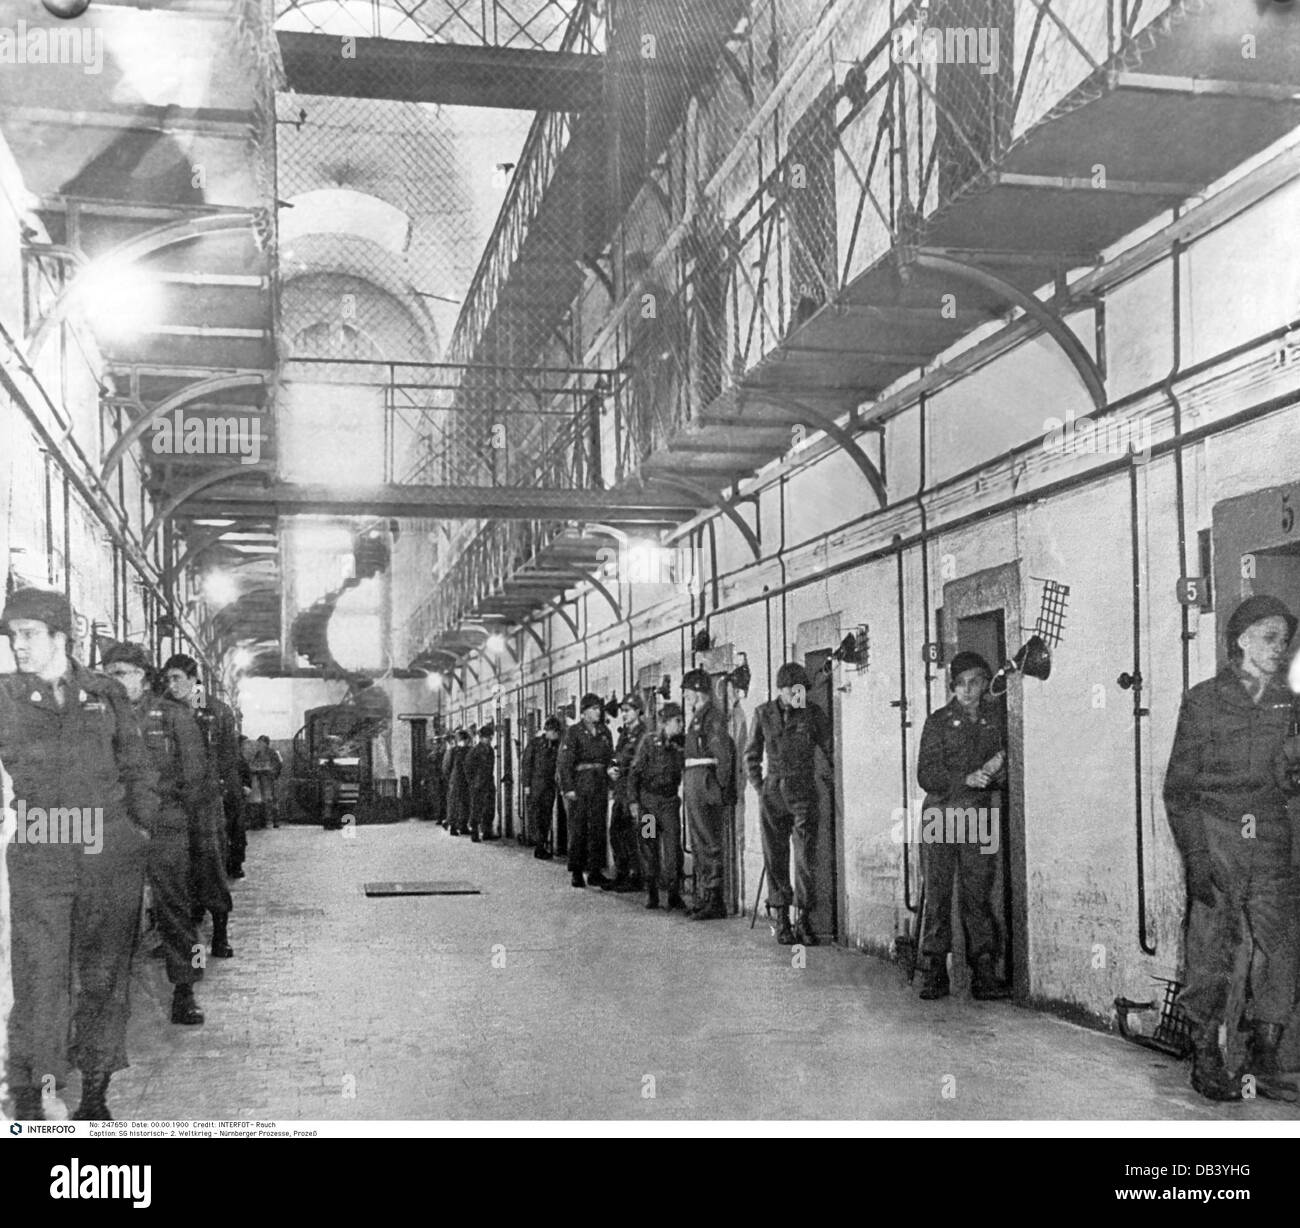 justice, lawsuits, Nuremberg Trials, trial against main war criminals, prison cells of the defendants, guards outside of the cells, after the suicide of Robert Ley, 1945 / 1946, Additional-Rights-Clearences-Not Available Stock Photo